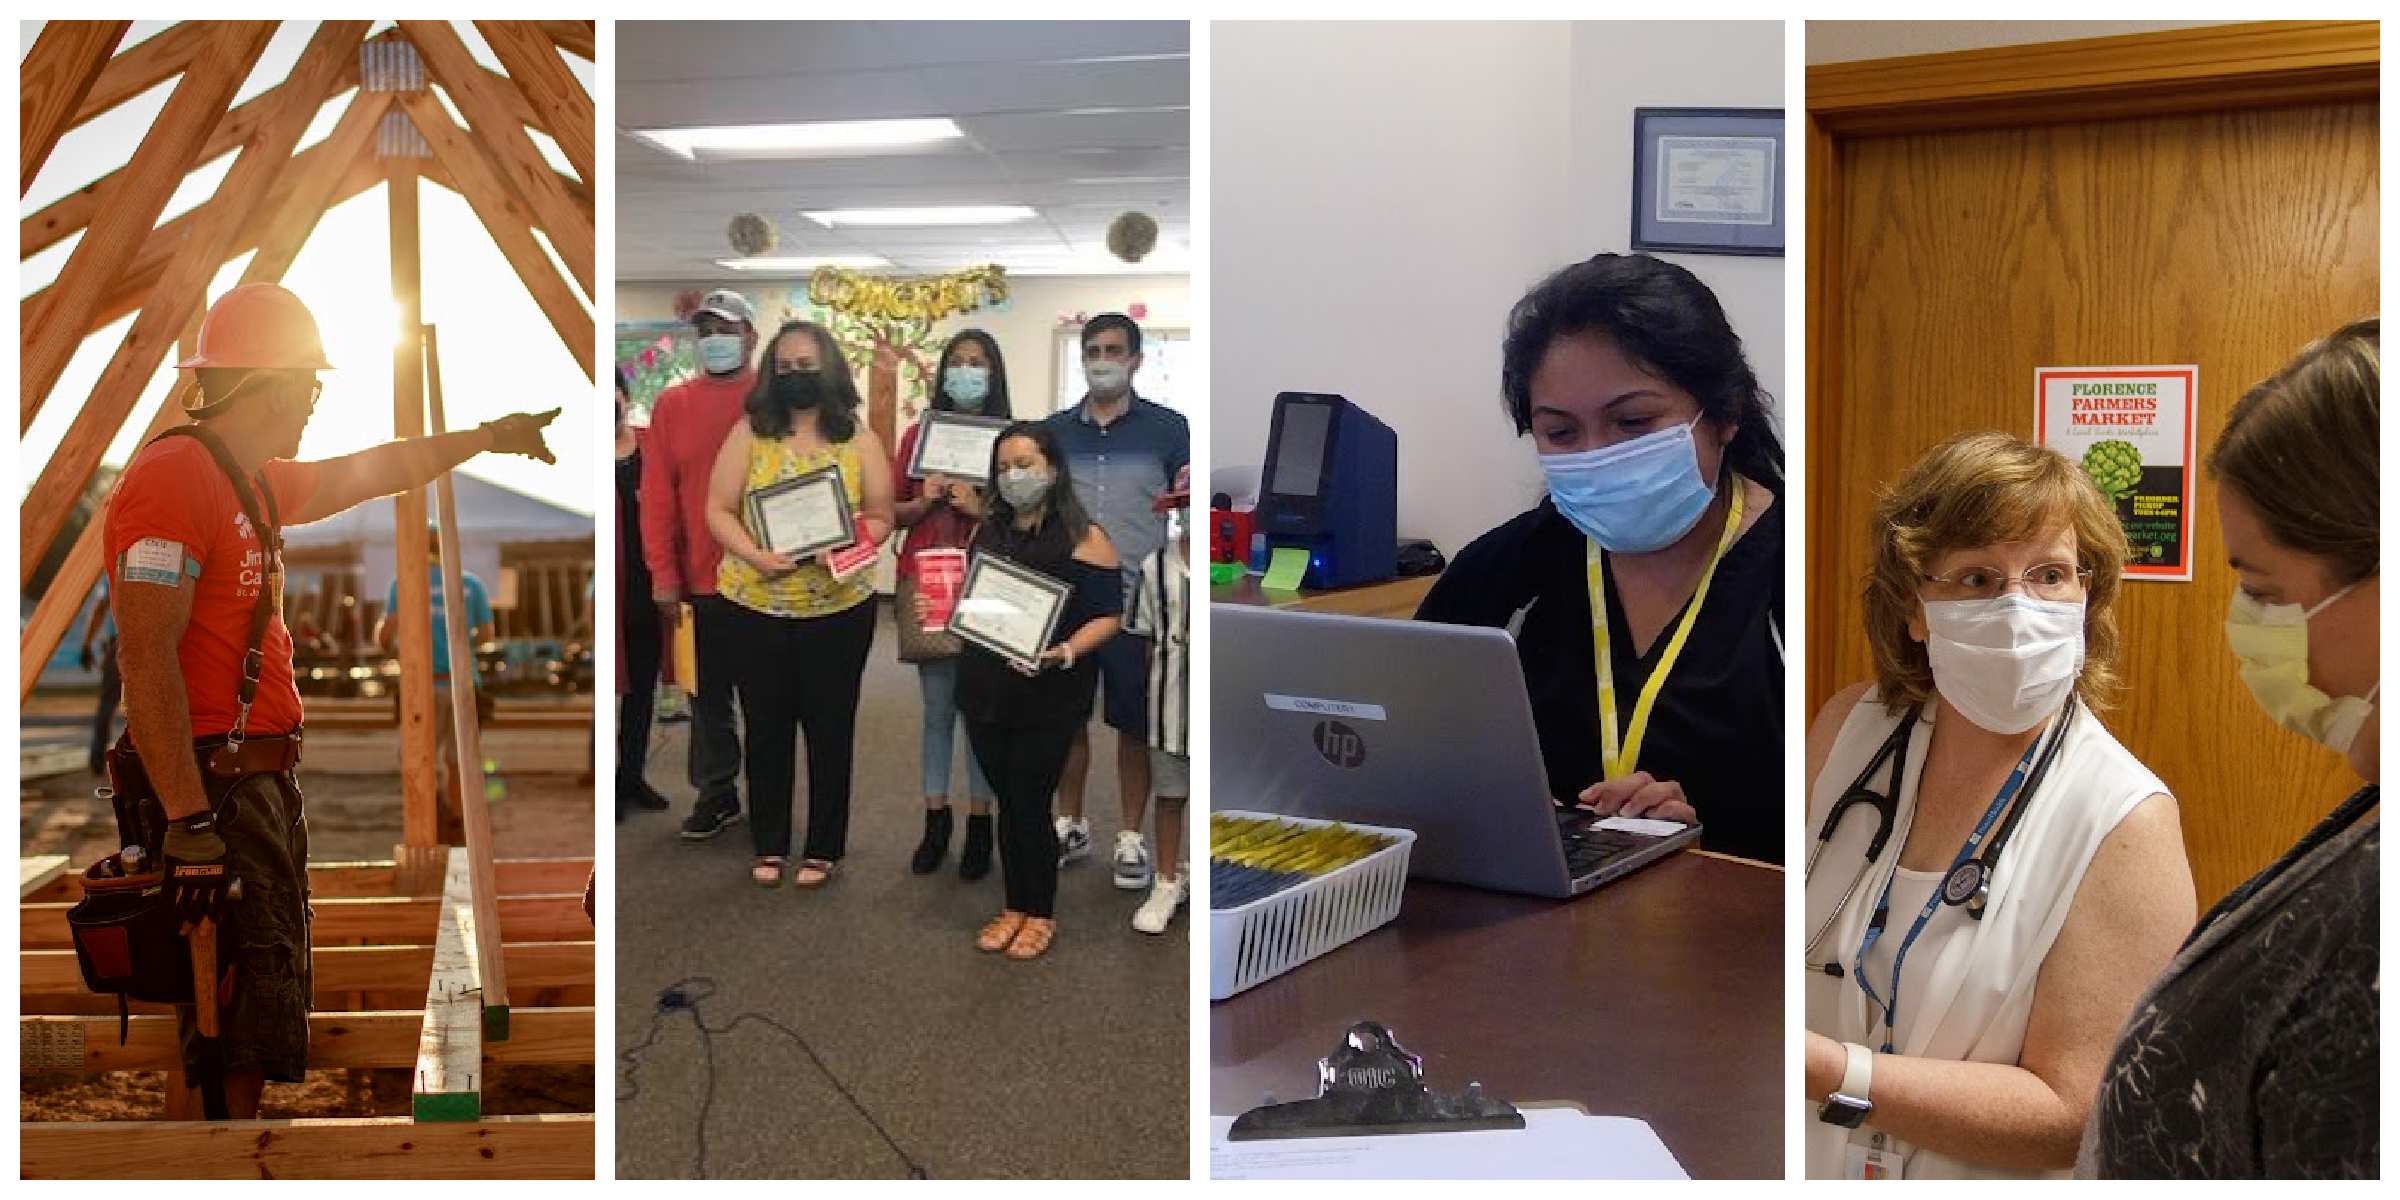 Image 1: a man wearing a hard hat points to something while standing in a construction site. Image 2: five adults hold certificates with a "Congrats" banner behind them. Image 3: a woman with dark hair wearing a mask works on a laptop. Image 4: a medical professional talks to a woman. 